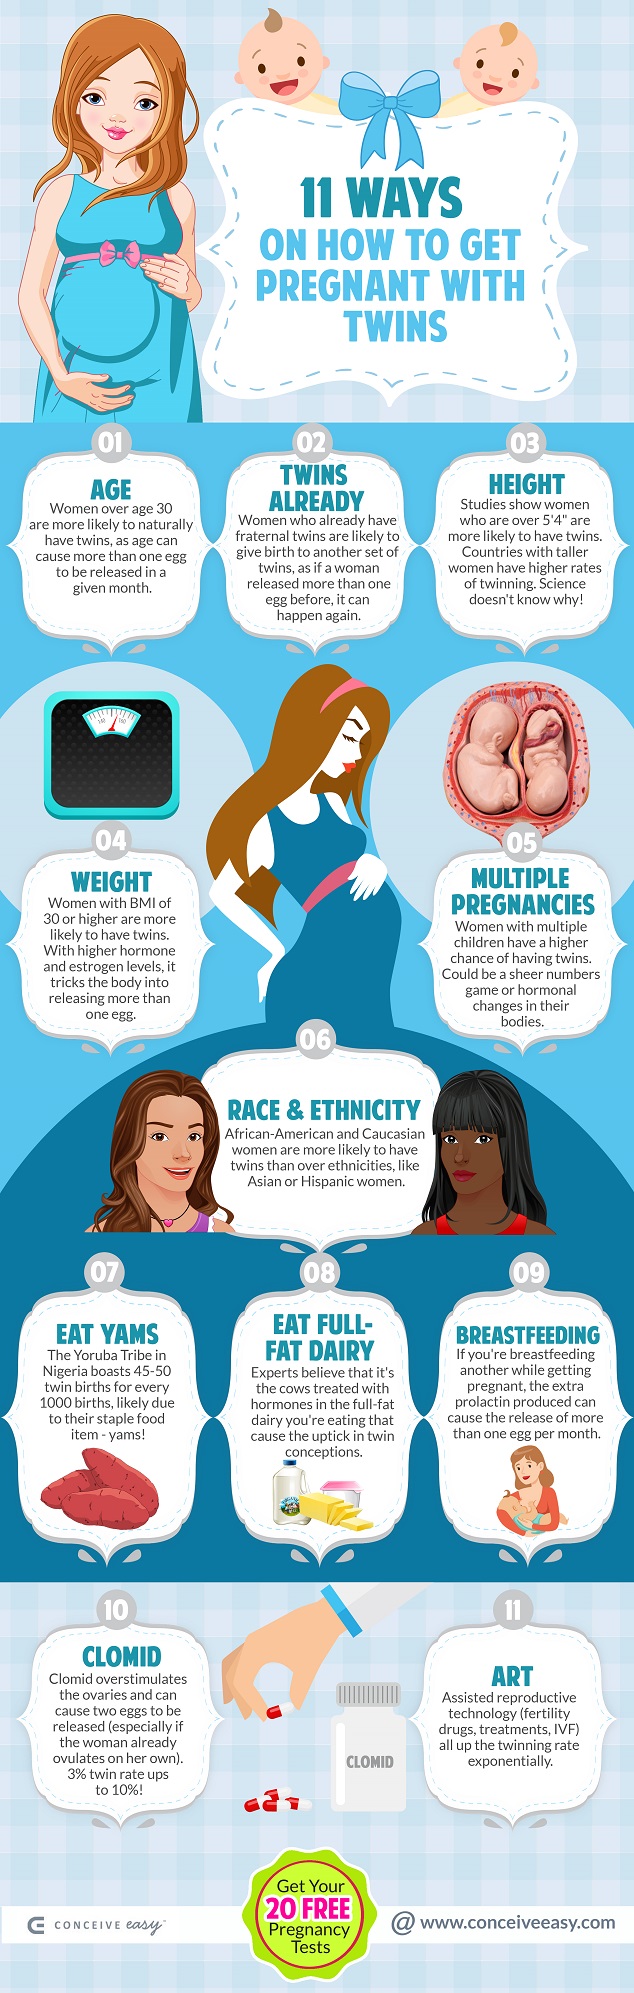 11 Ways to Get Pregnant with Twins Infographic